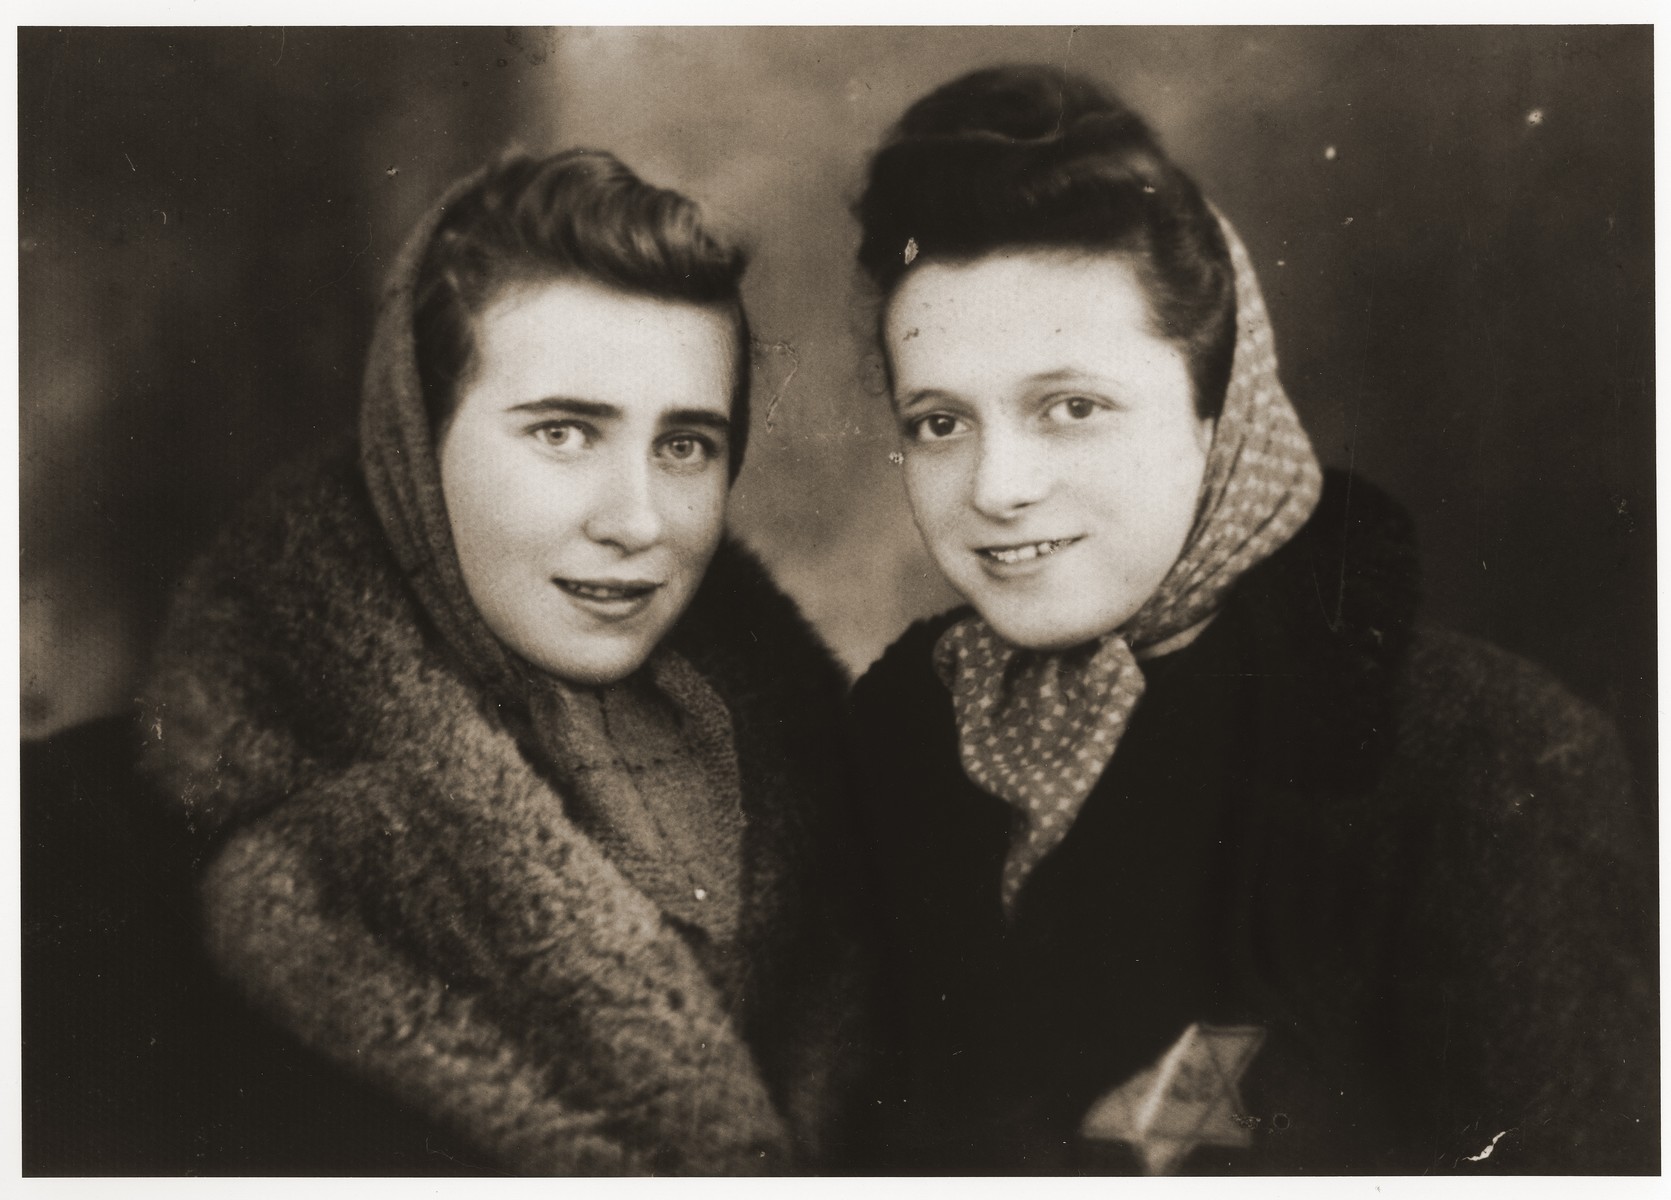 Portrait of two young women in the Dabrowa ghetto.

Pictured on the left is Ala Zylbersztajn.